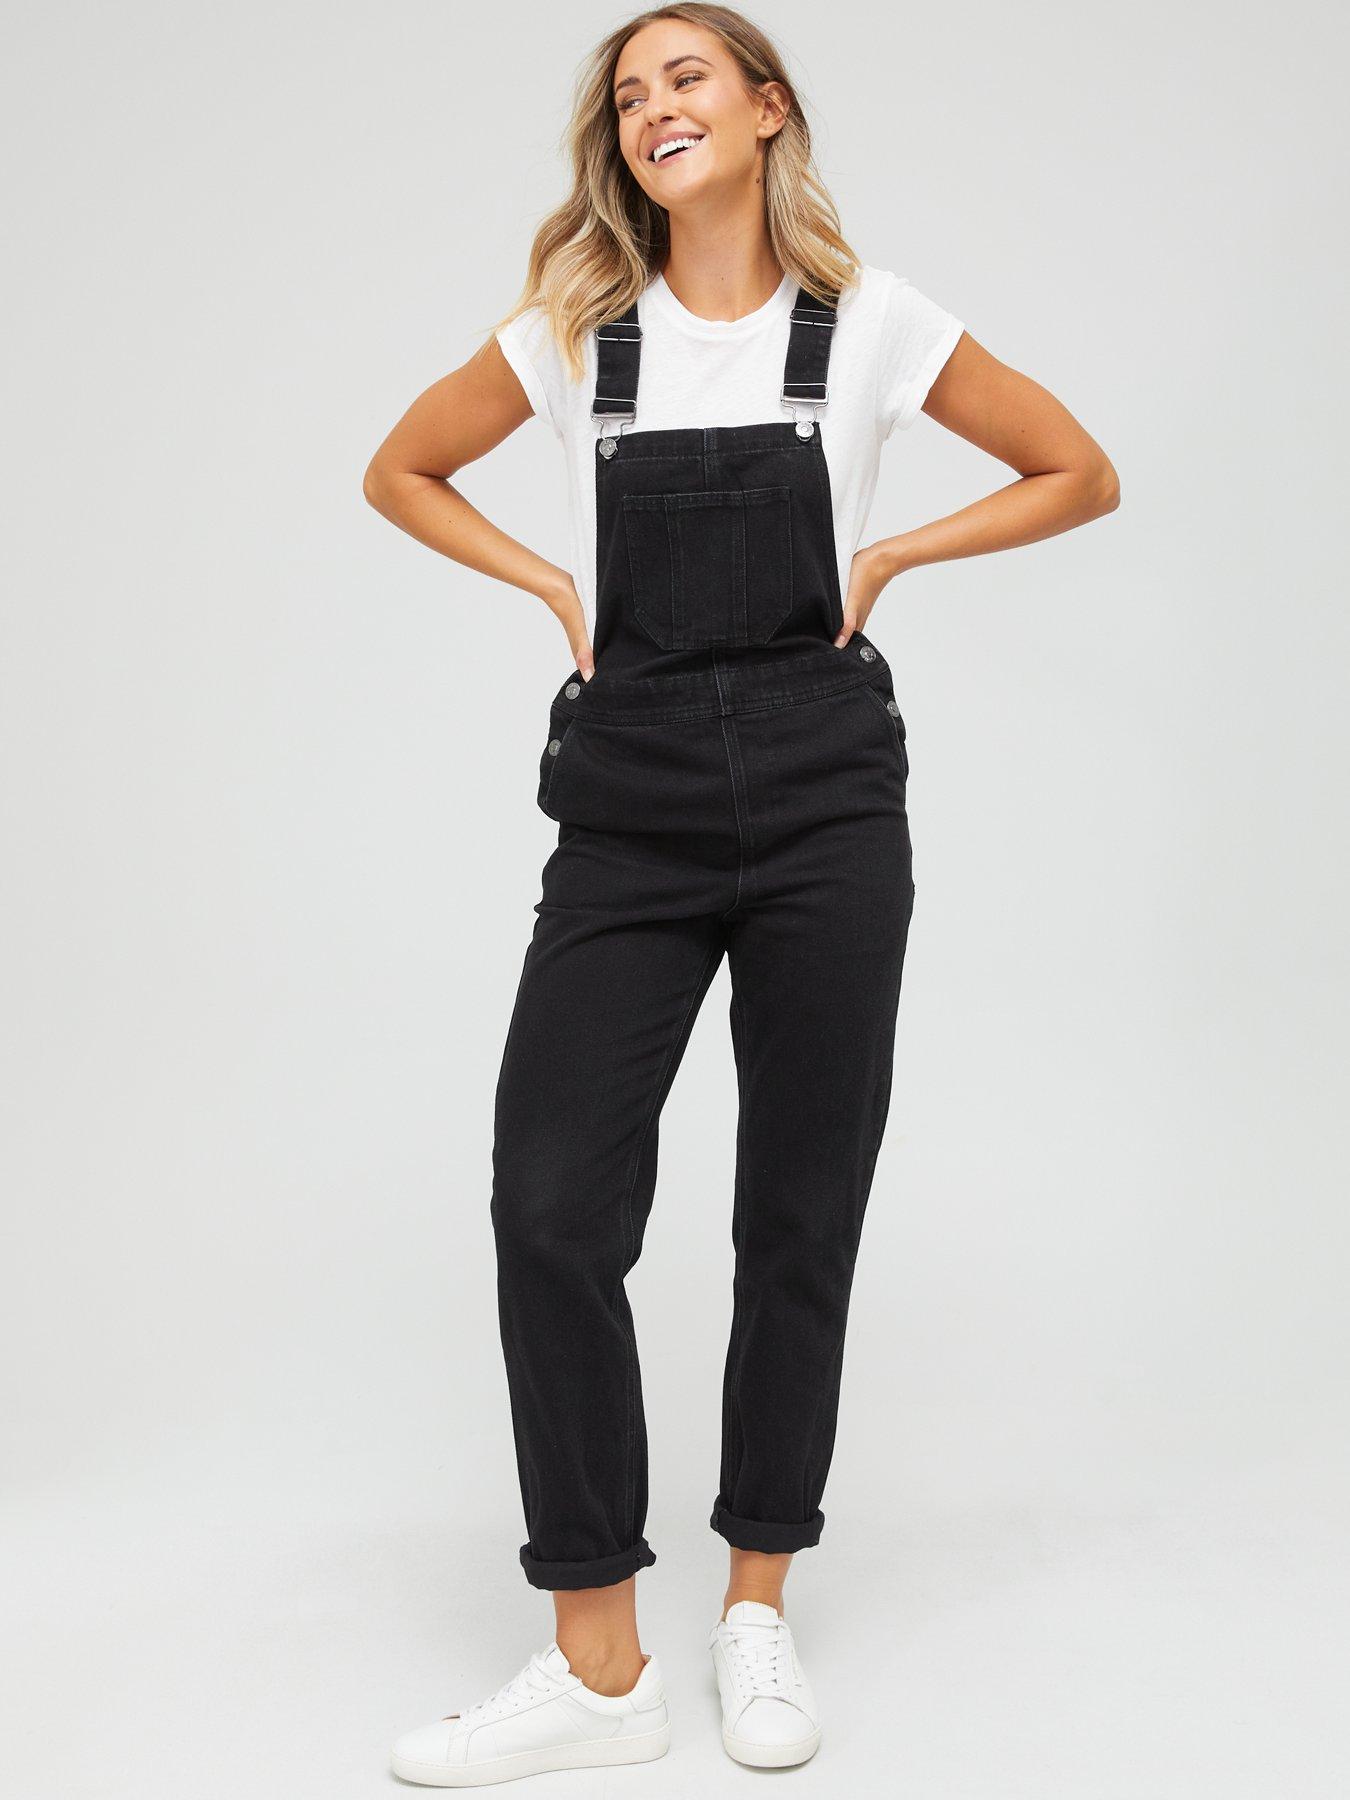 WOMEN FASHION Baby Jumpsuits & Dungarees Jean Dungaree discount 88% White S Pull&Bear dungaree 